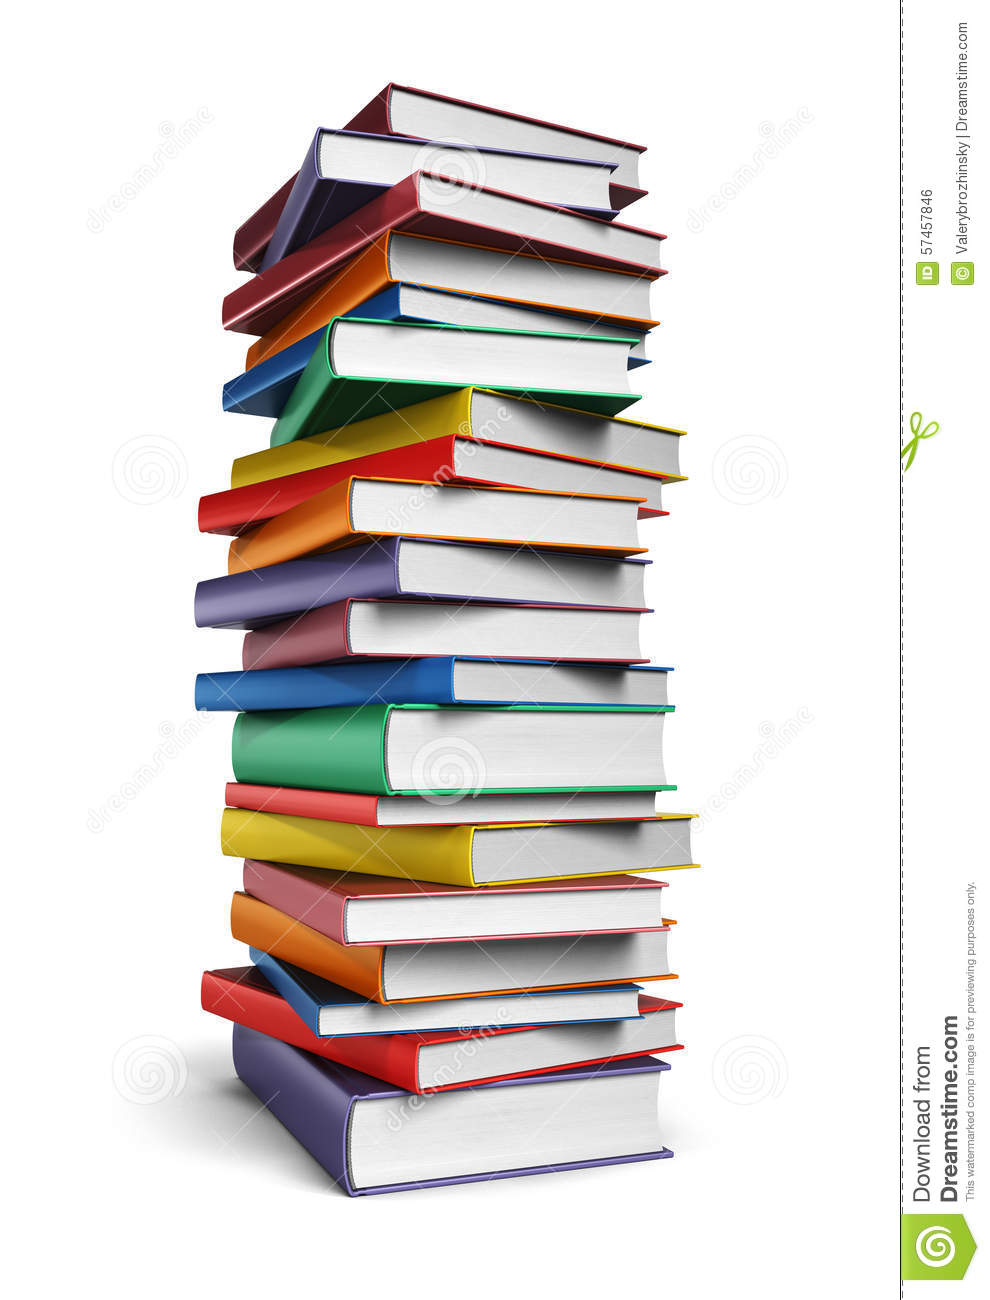 stack of books clipart large